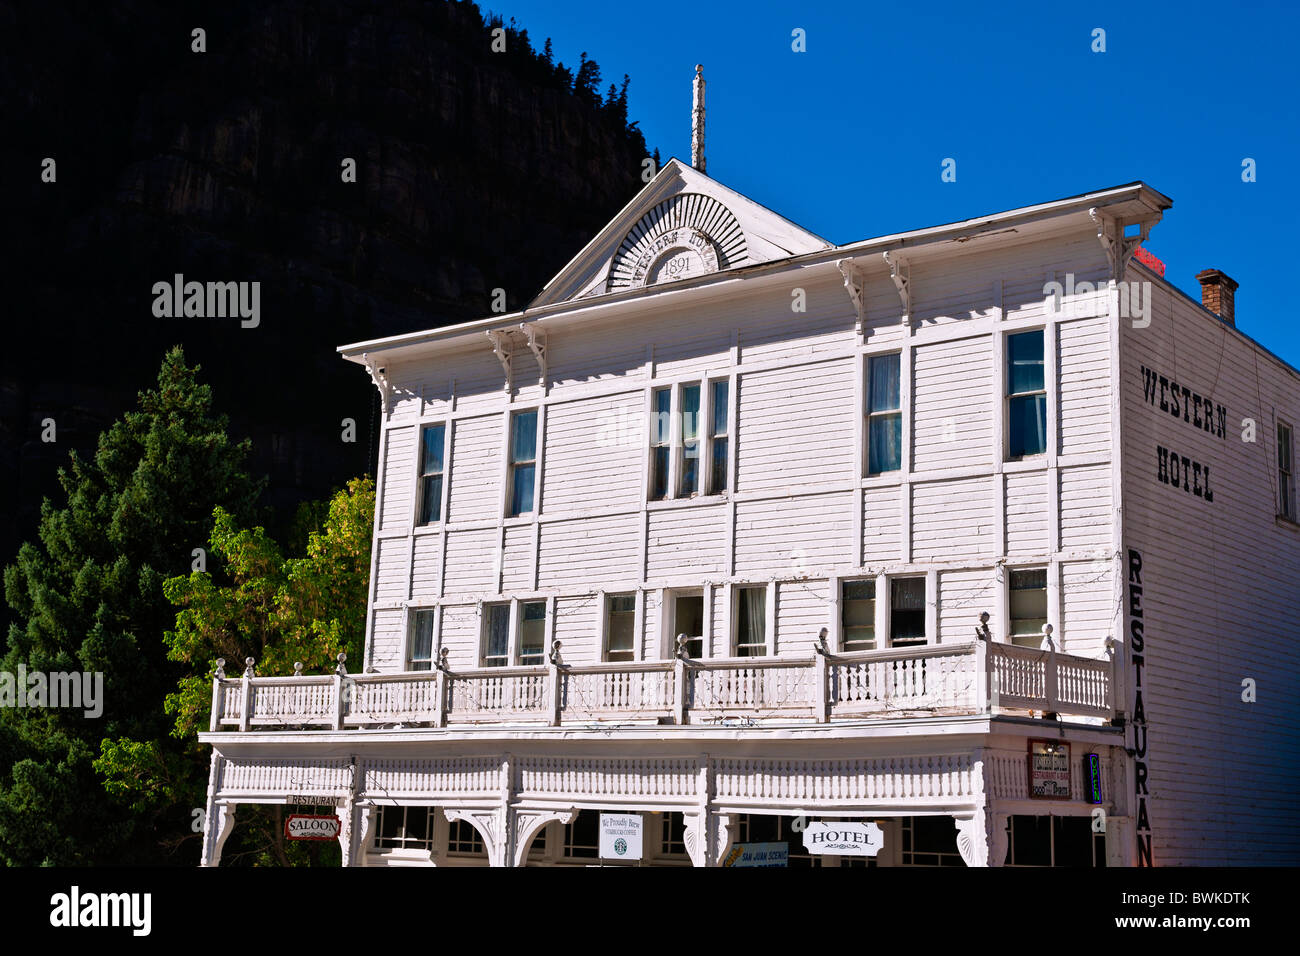 The historic Western Hotel, Ouray, Colorado Stock Photo Alamy